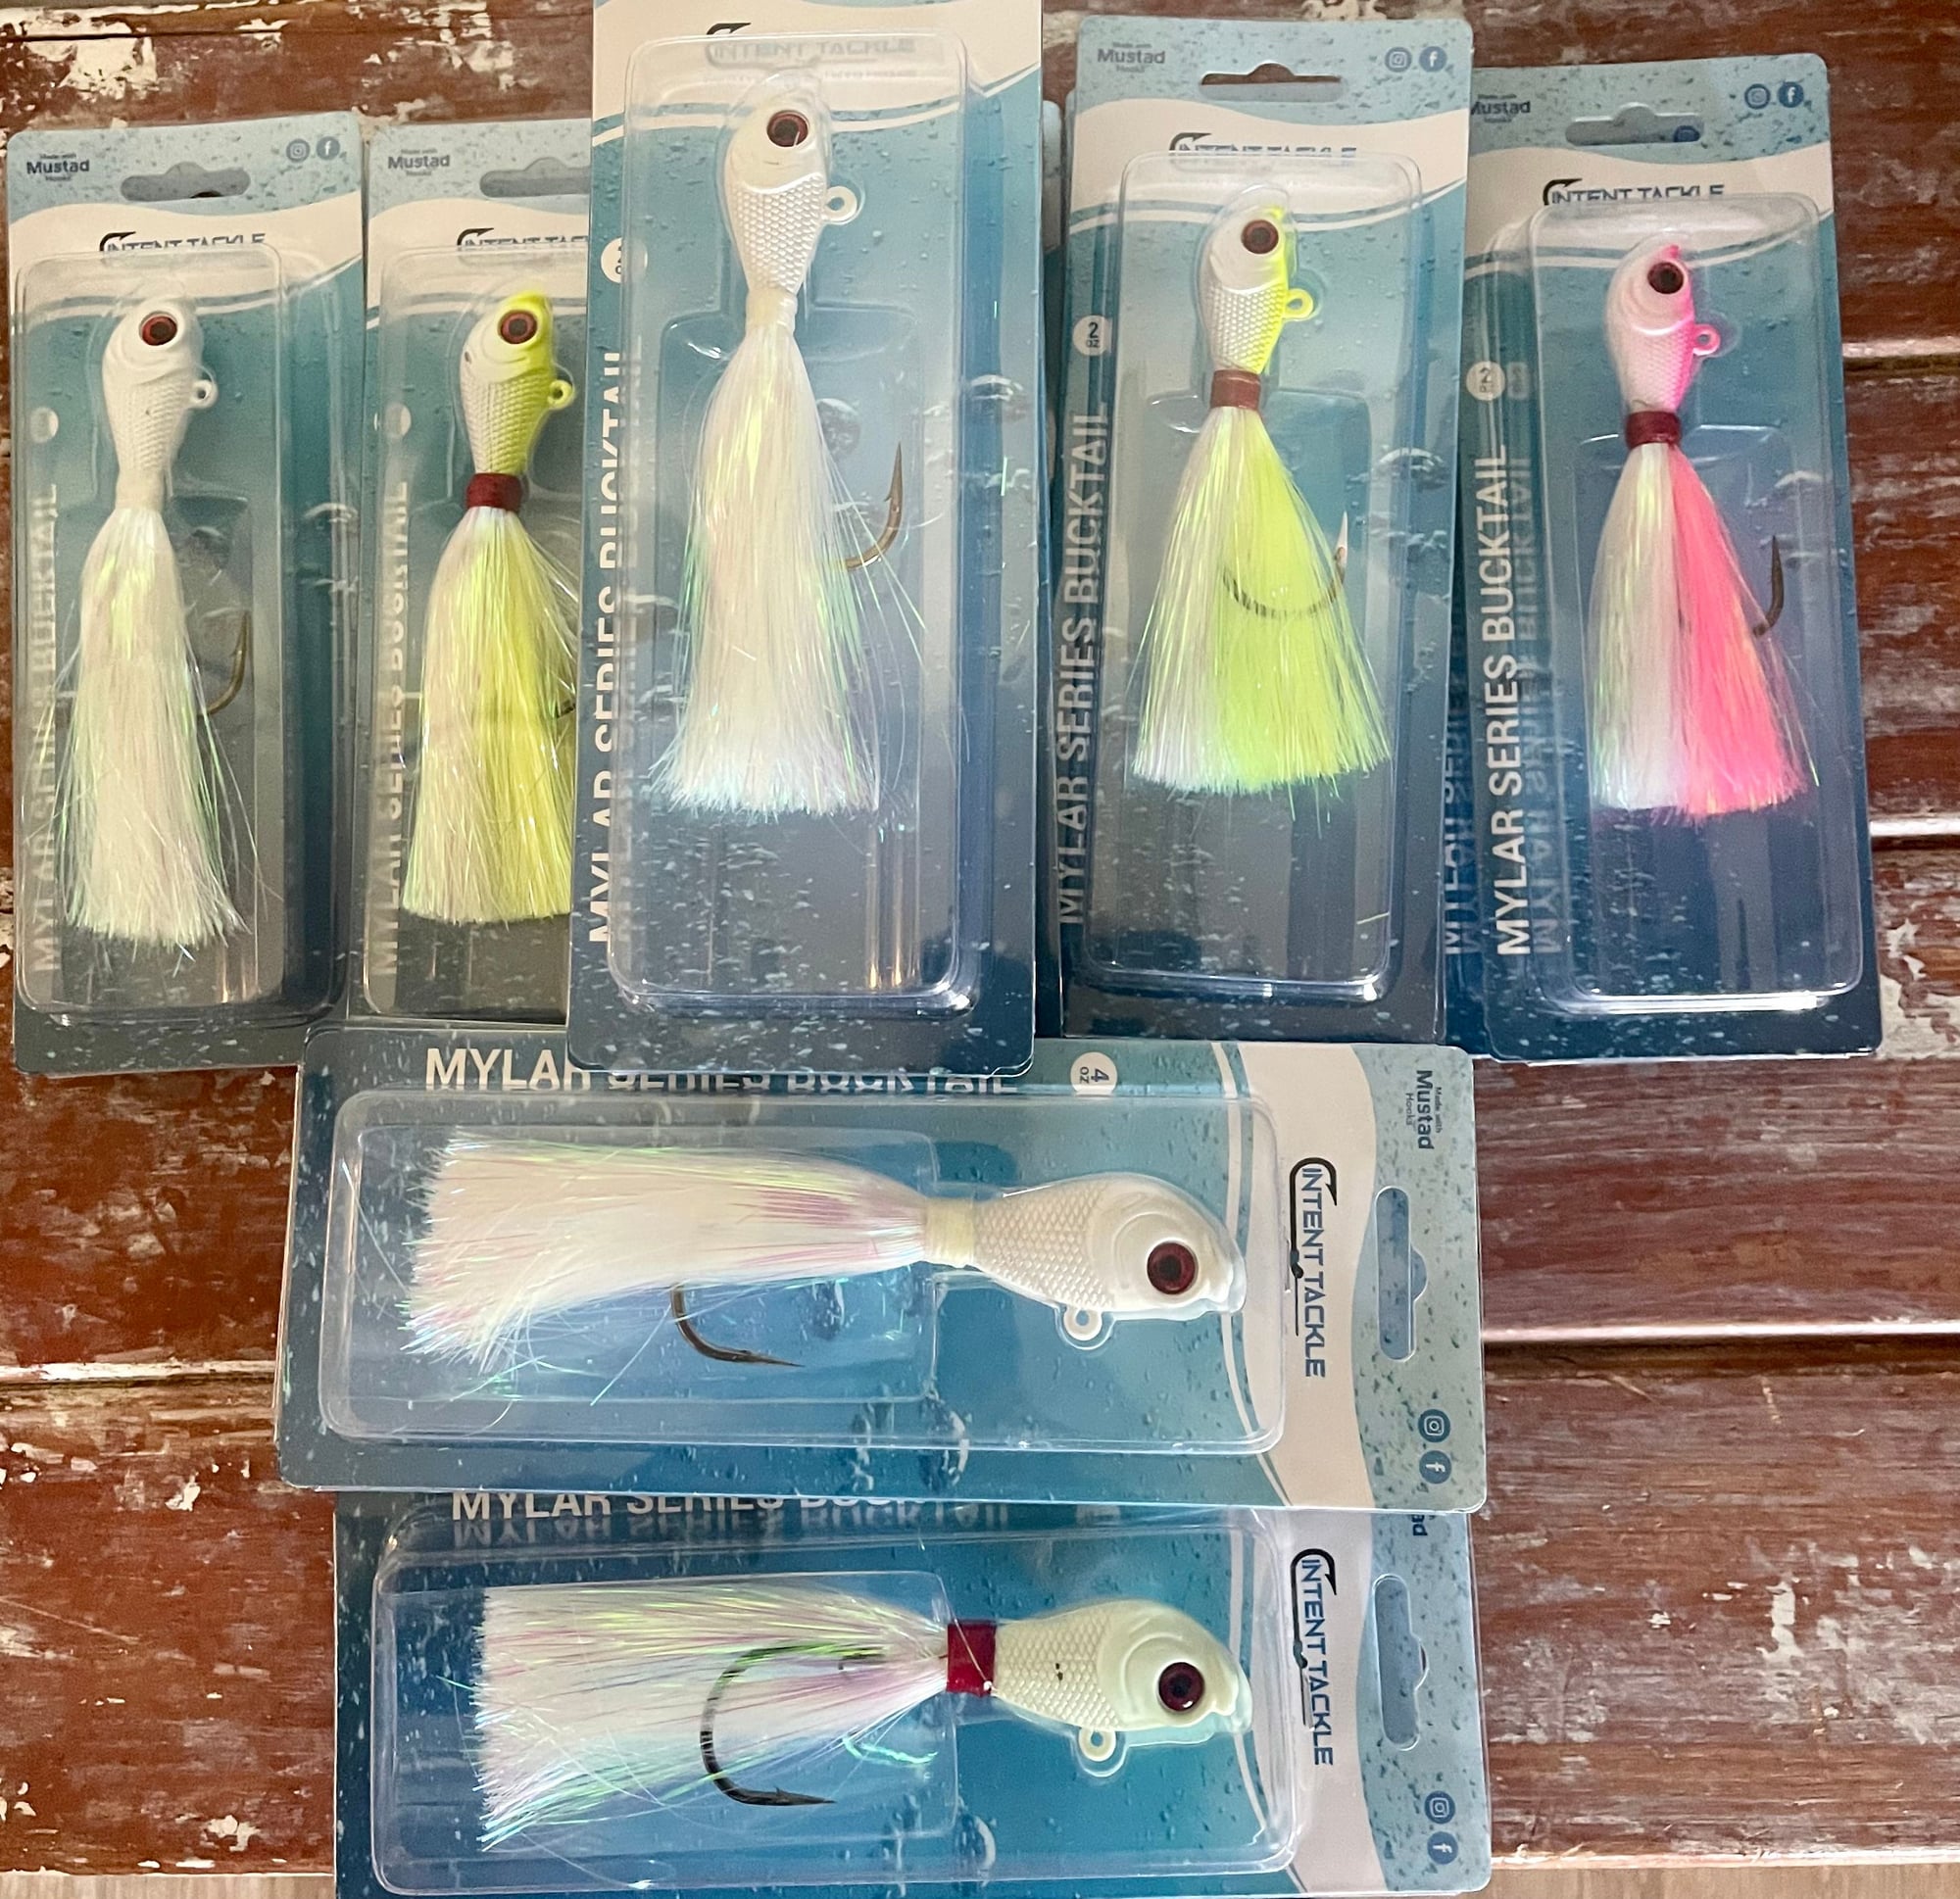 Intent Tackle Chipped Paint Mylar Bucktail Sale - The Hull Truth